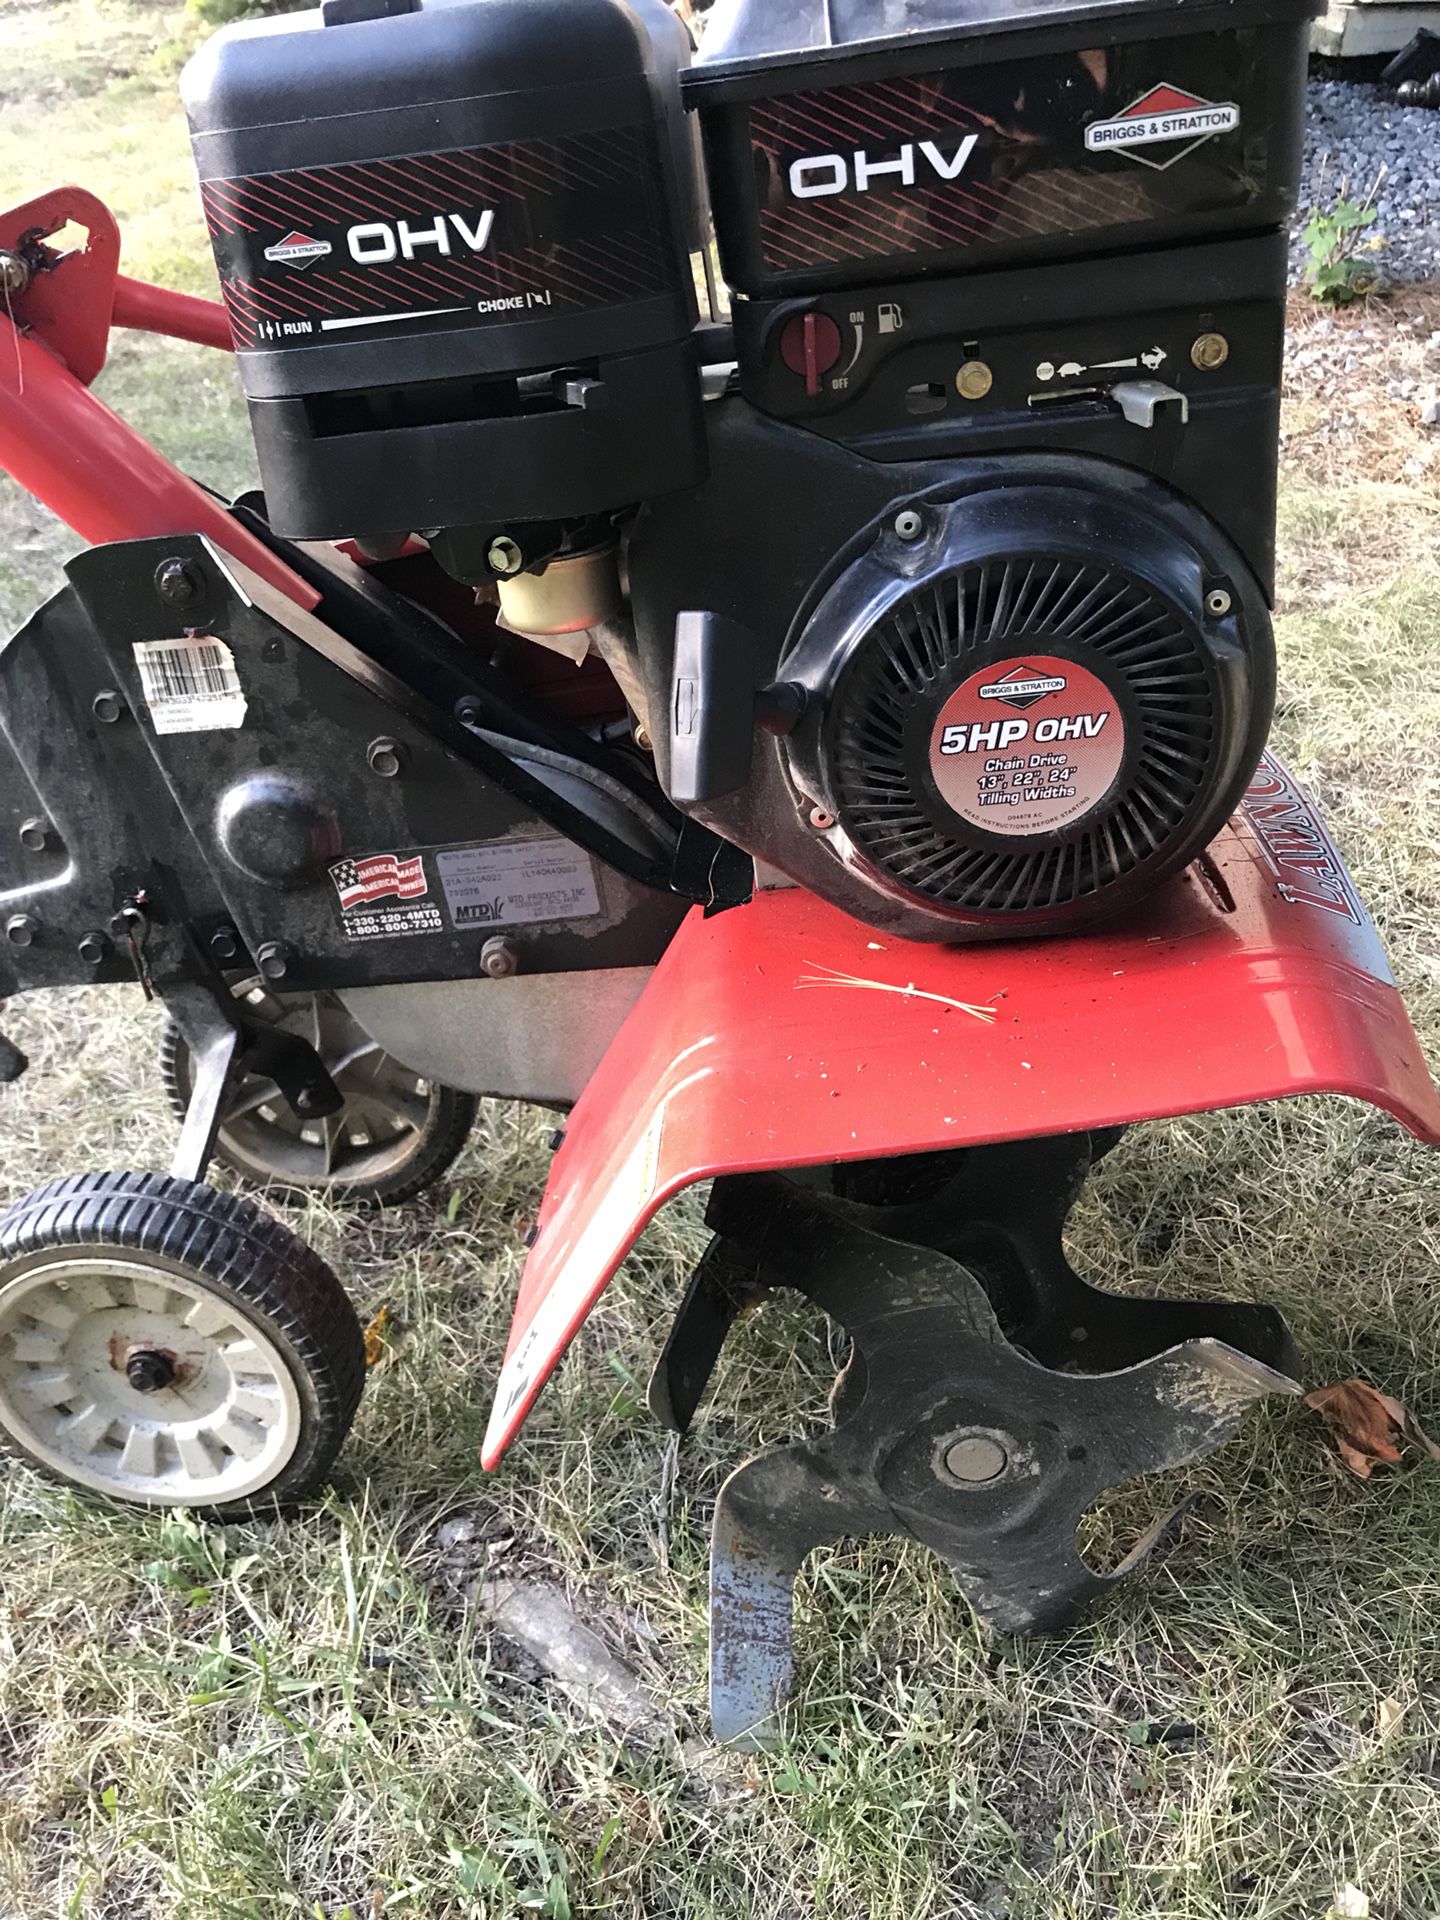 Tiller Lawn Chief 5 hp for Sale in Carlisle, PA - OfferUp